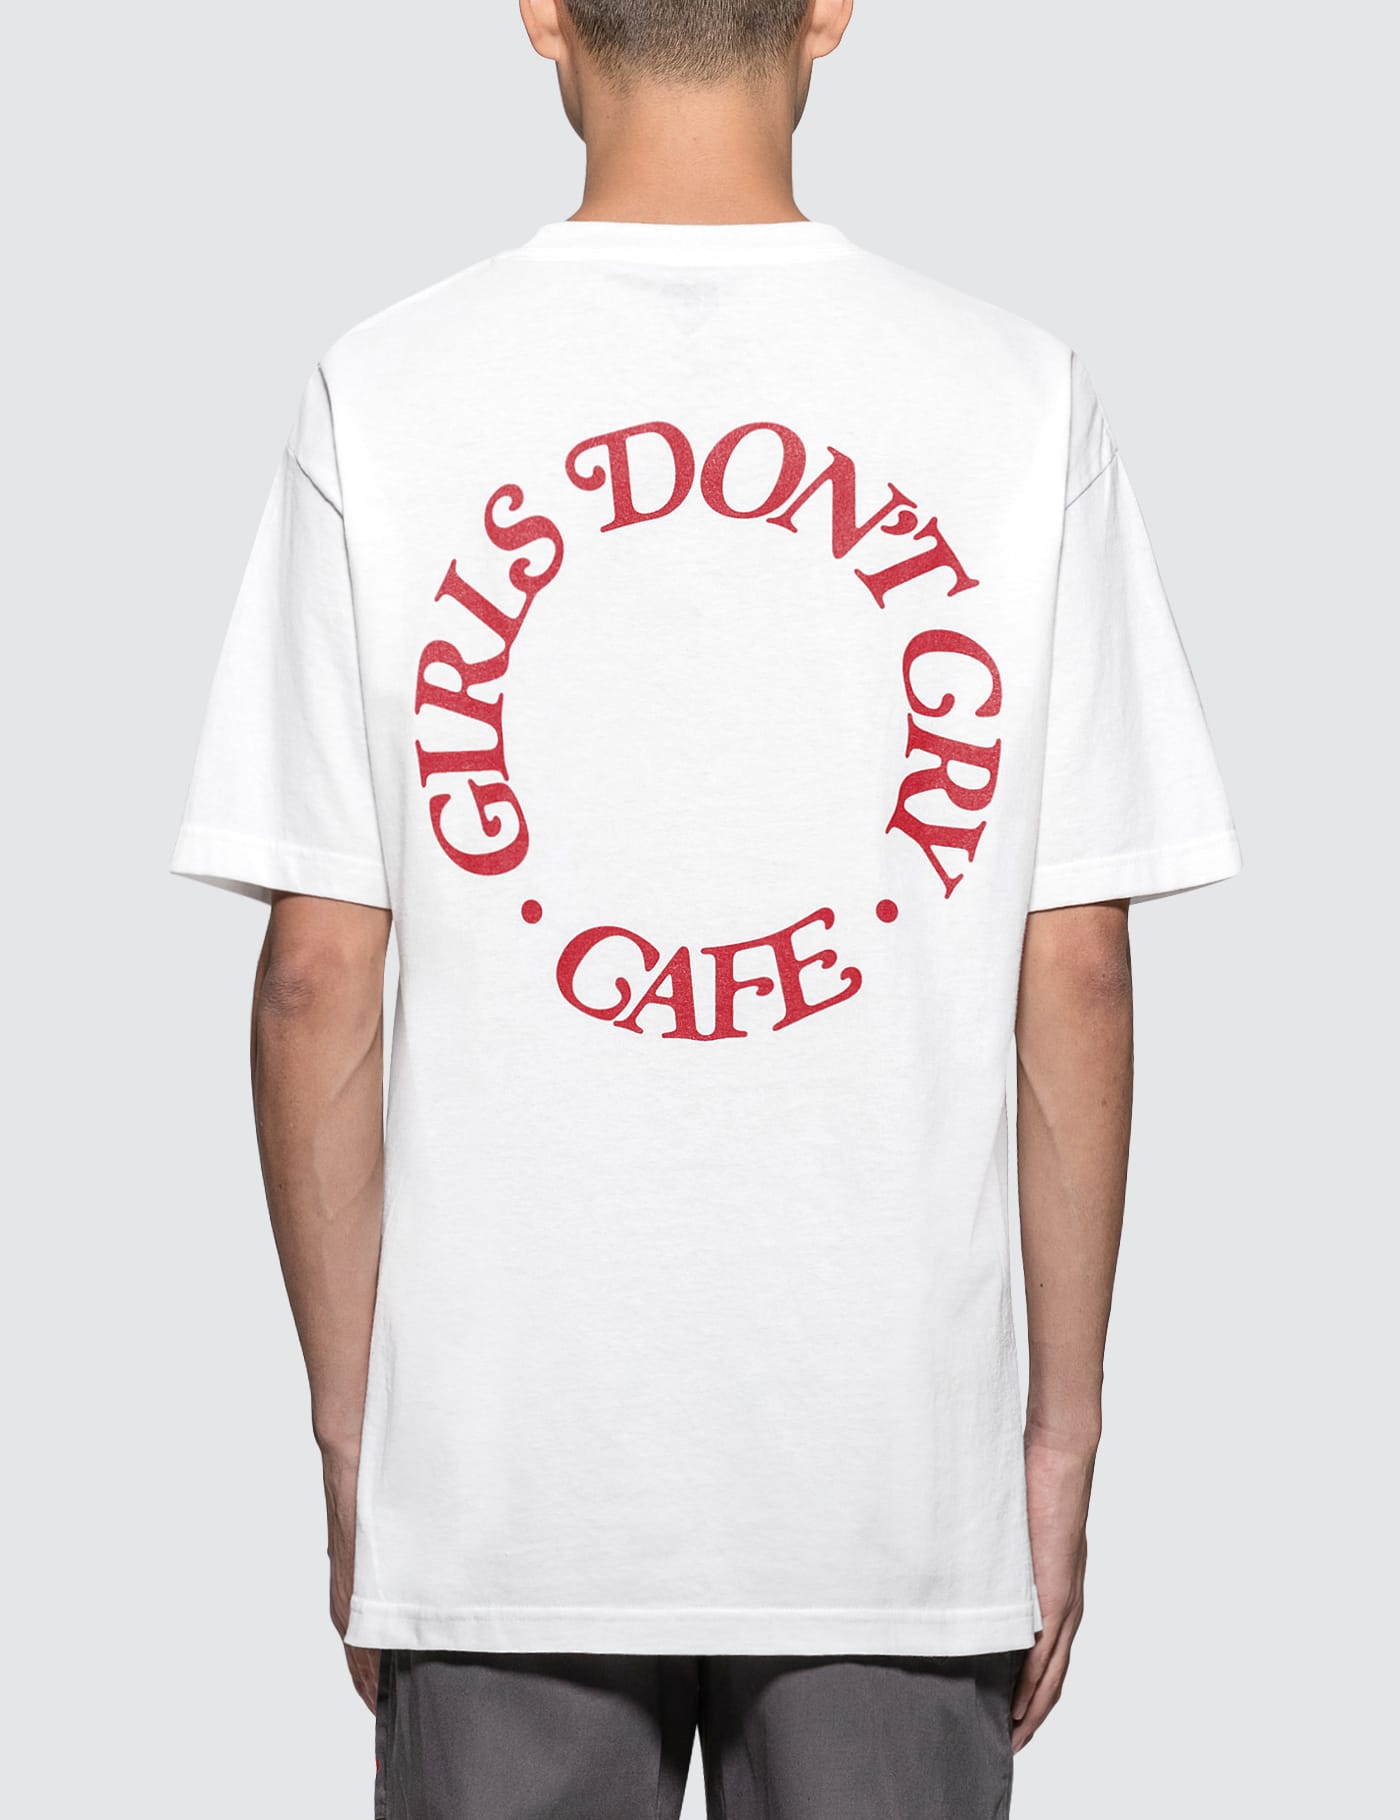 Girls Don't Cry - GDC Cafe S/S T-Shirt | HBX - Globally Curated Fashion and  Lifestyle by Hypebeast